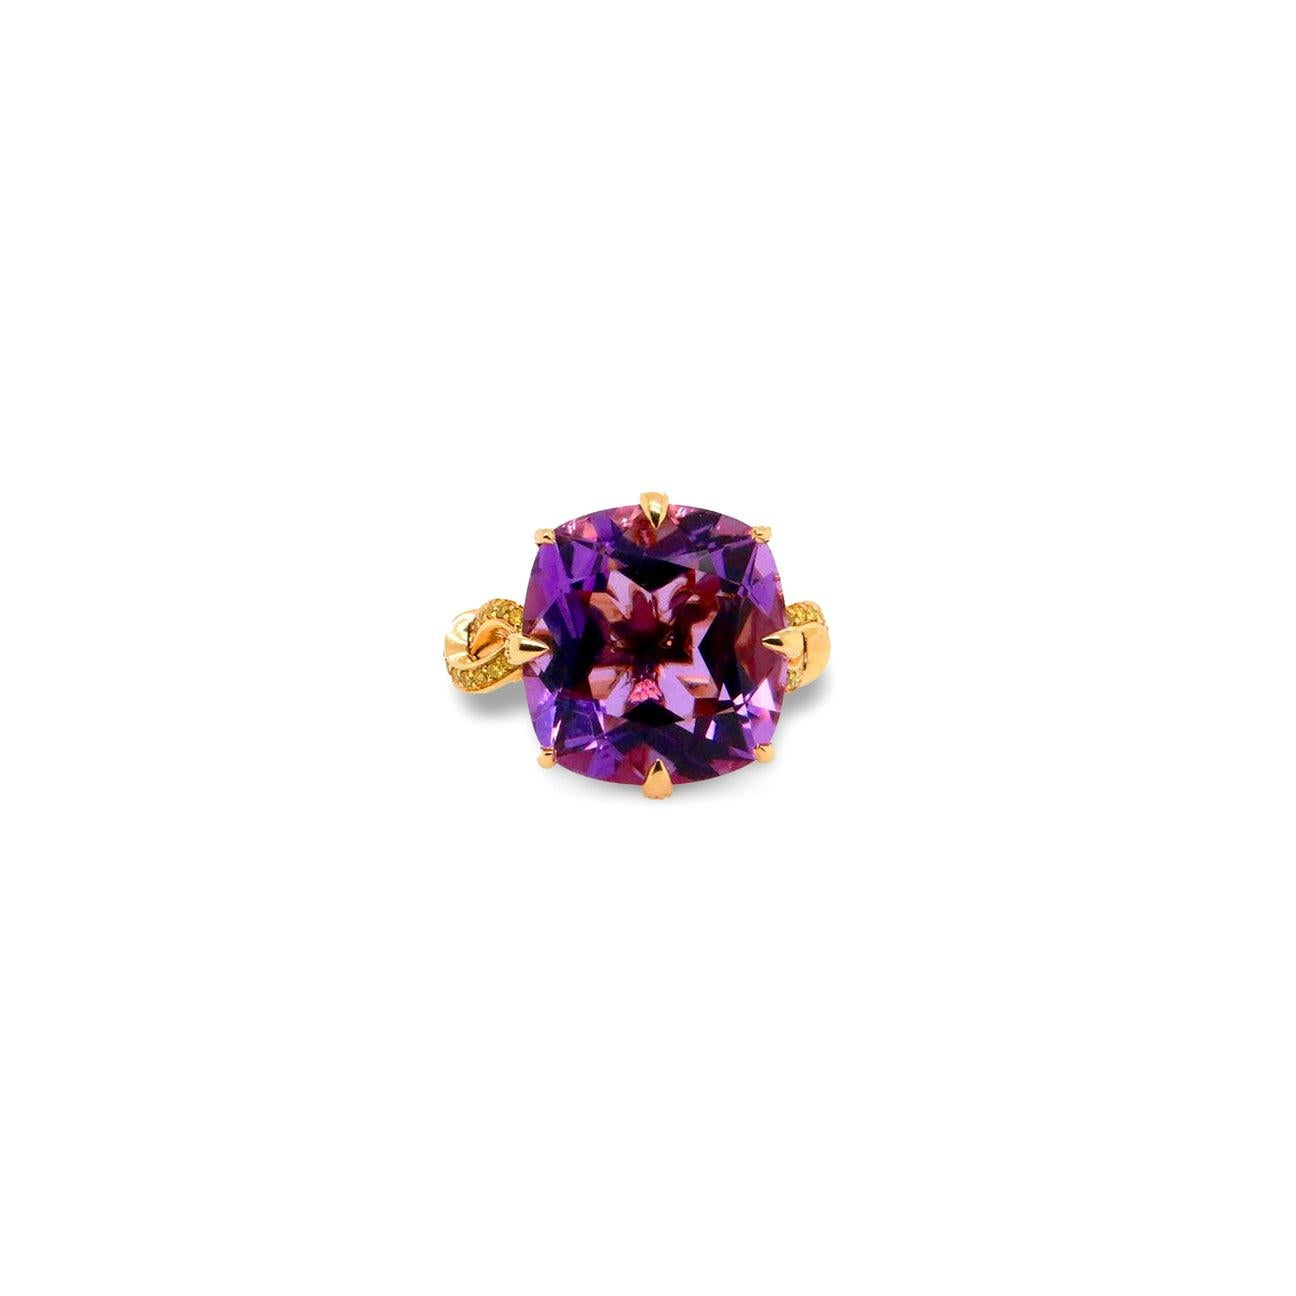 For Sale:  'Forget me Knot' Amethyst and Yellow Diamond Cocktail Ring in 18ct Yellow Gold 10